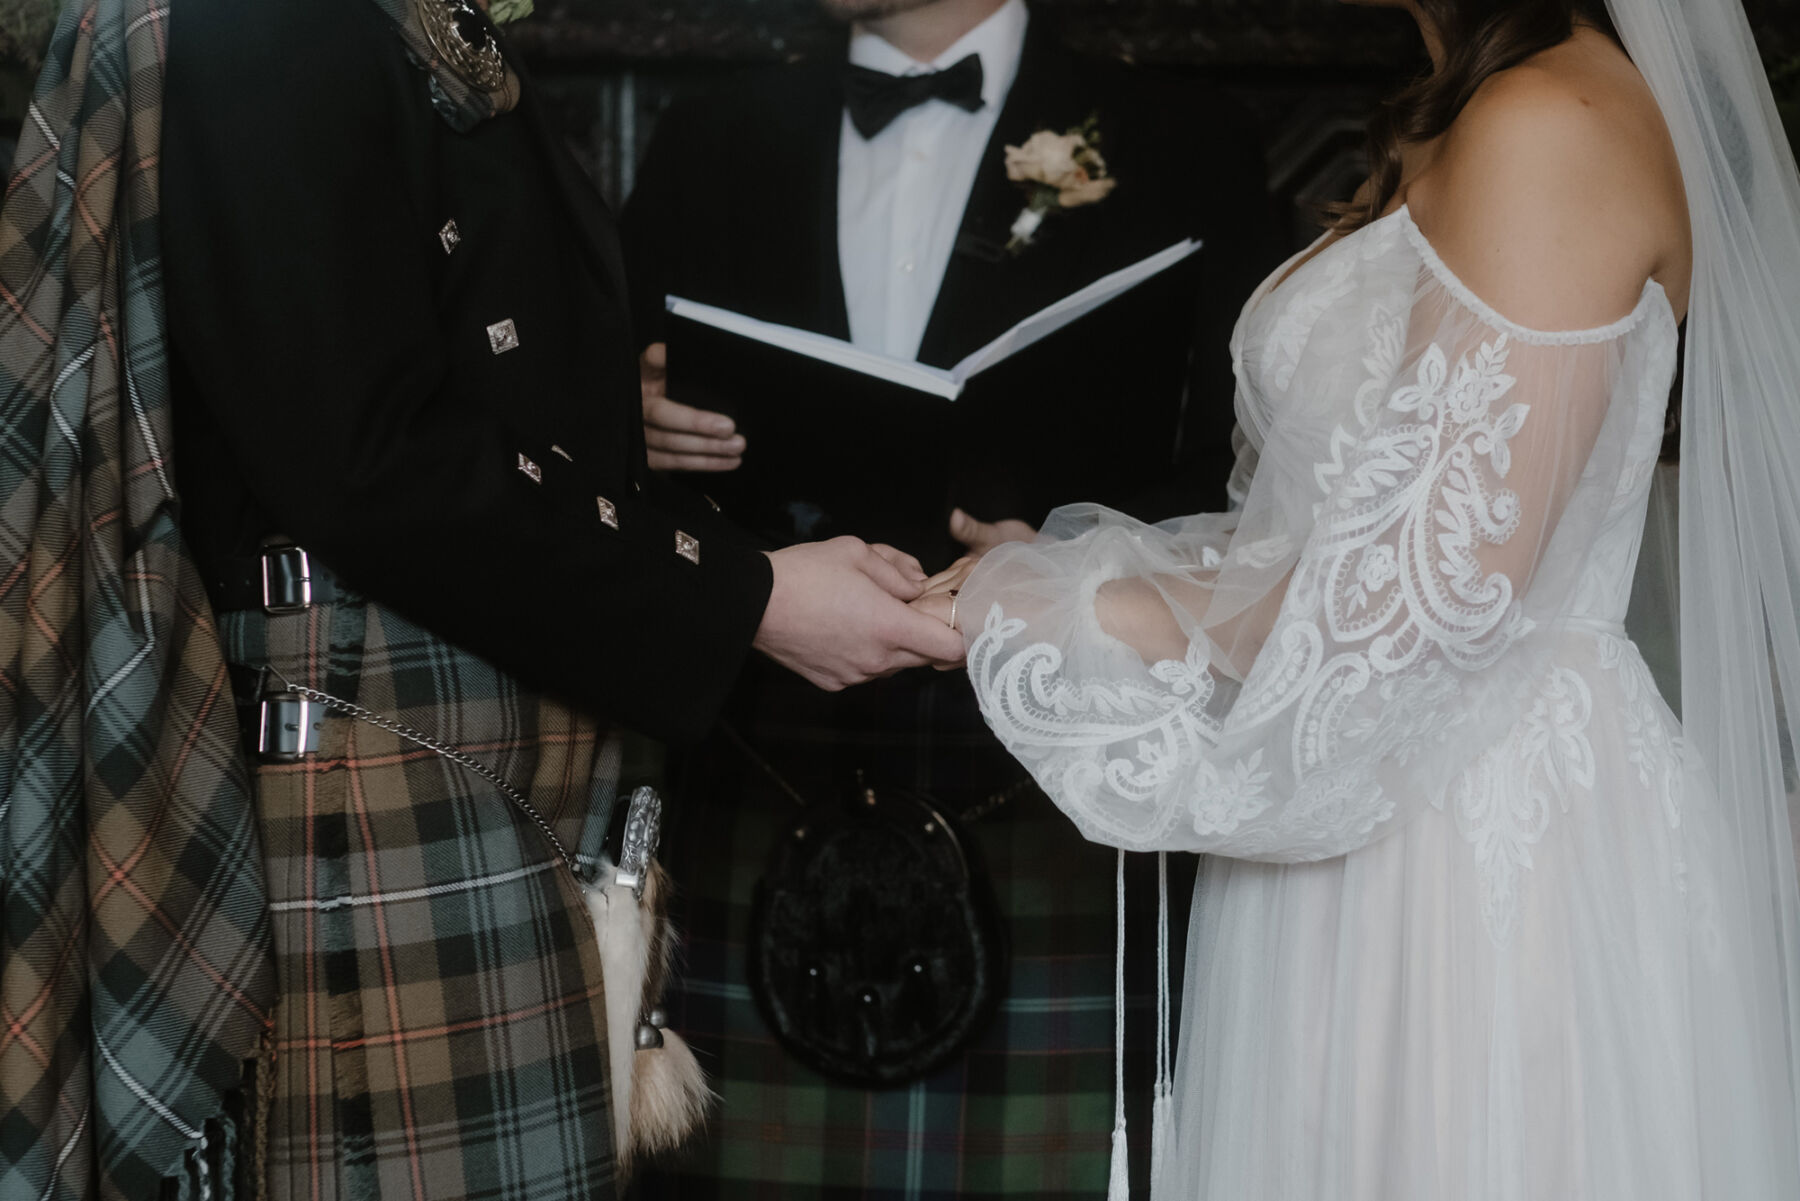 Image focussing on the bride and groom holding hands during their wedding ceremony at Cambo Estate. Groom in a kilt, bride wears an off the shoulder gown by Willowby by Watters. 